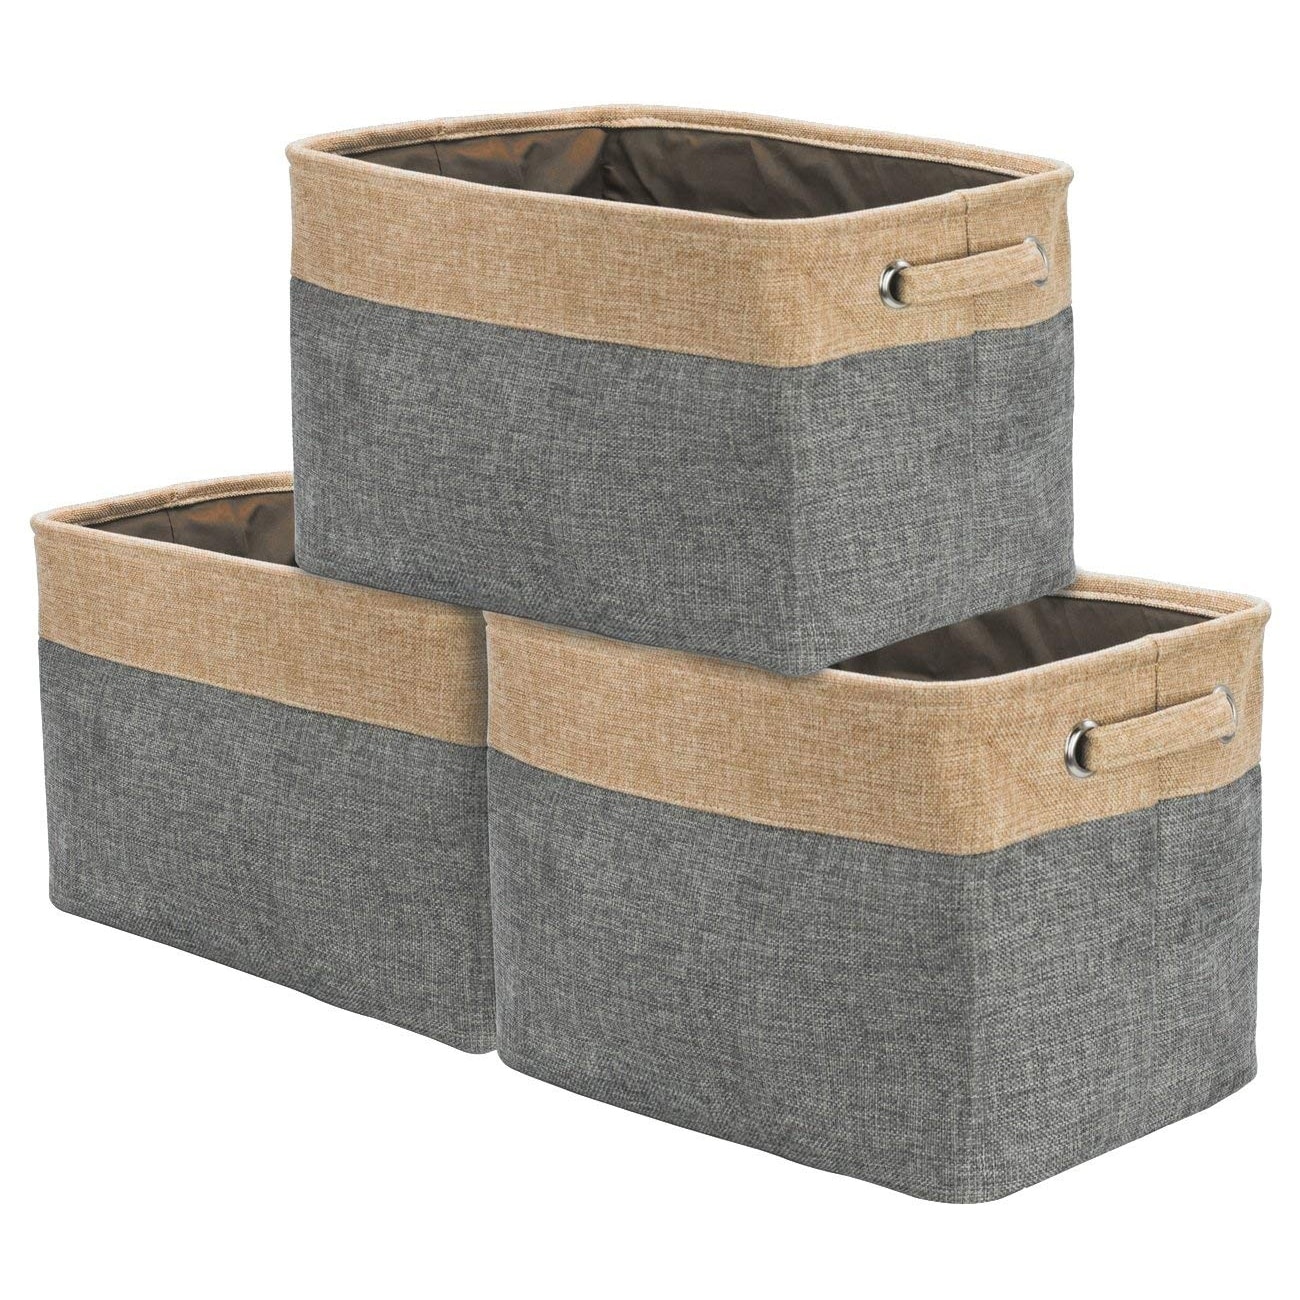 https://ak1.ostkcdn.com/images/products/is/images/direct/0dc523c3094dfad457fe4868d54cf004e3936a1b/Storage-Large-Basket-Set---Big-Rectangular-Fabric-Collapsible-Organizer-Bin-Box-with-Carry-Handles-%283-Pk-Grey-Tan%29.jpg